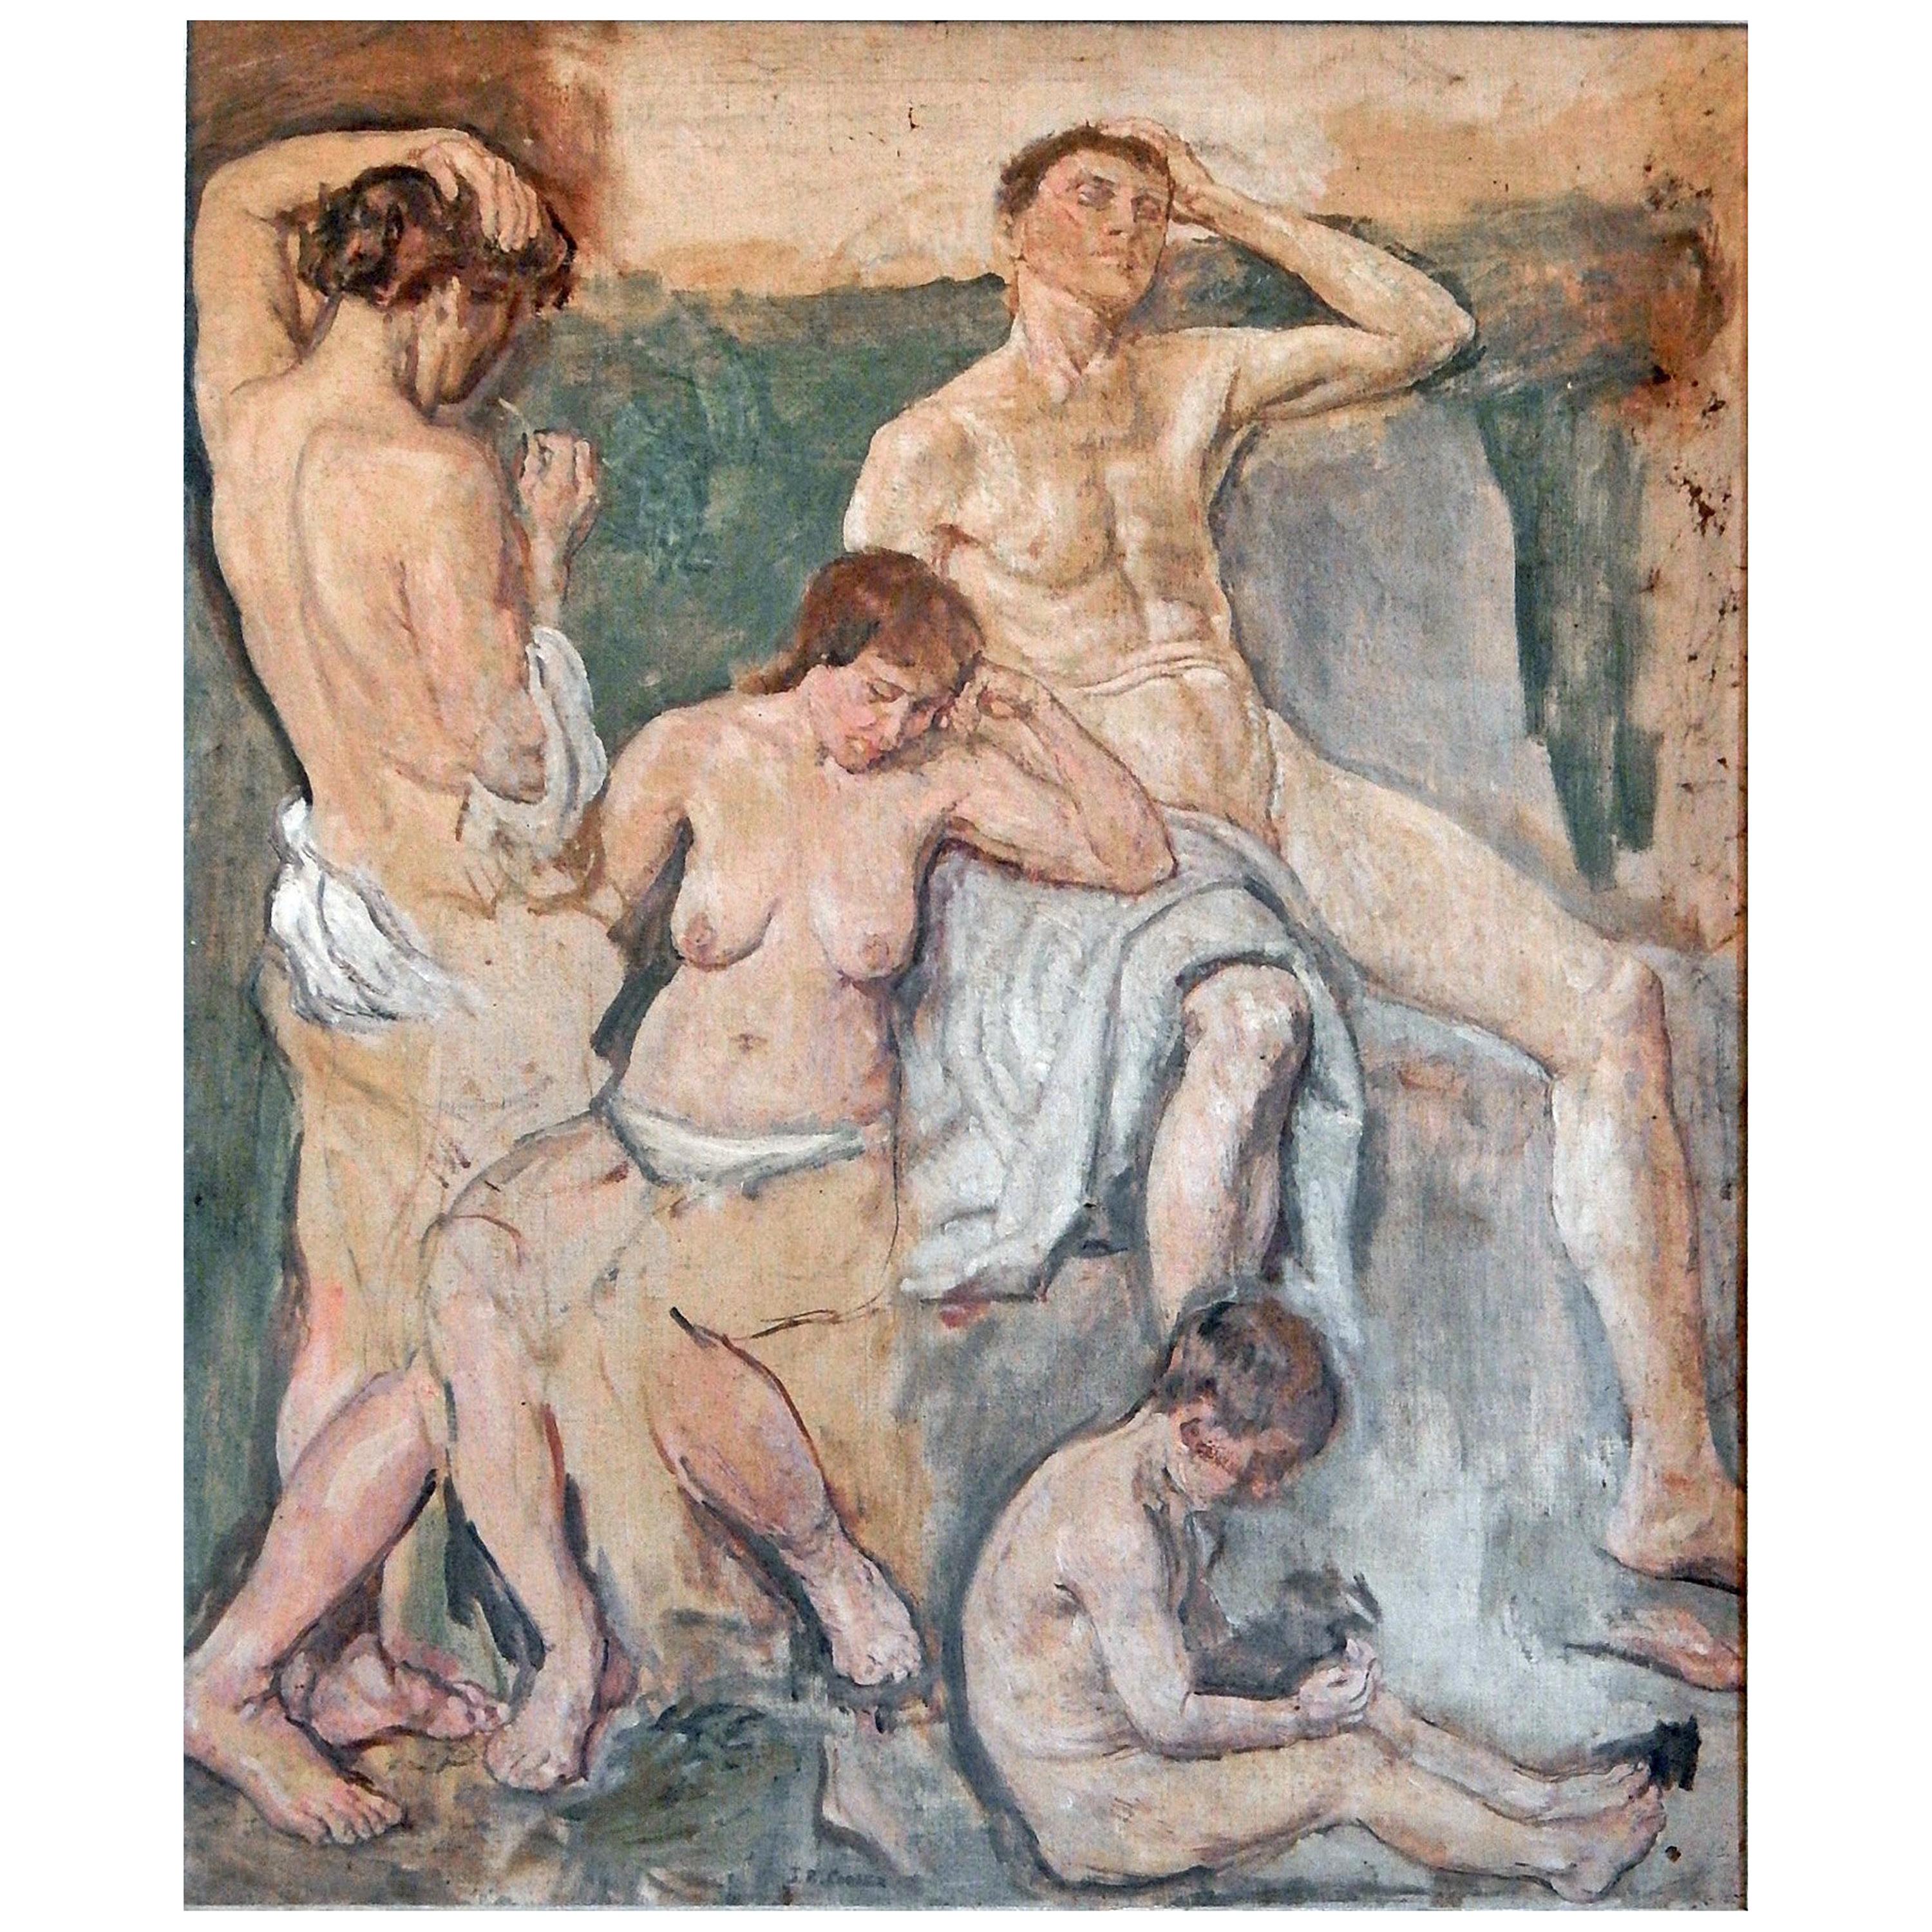 "Music, " High Accomplished Painting with Multiple Nudes by Conner, 1946